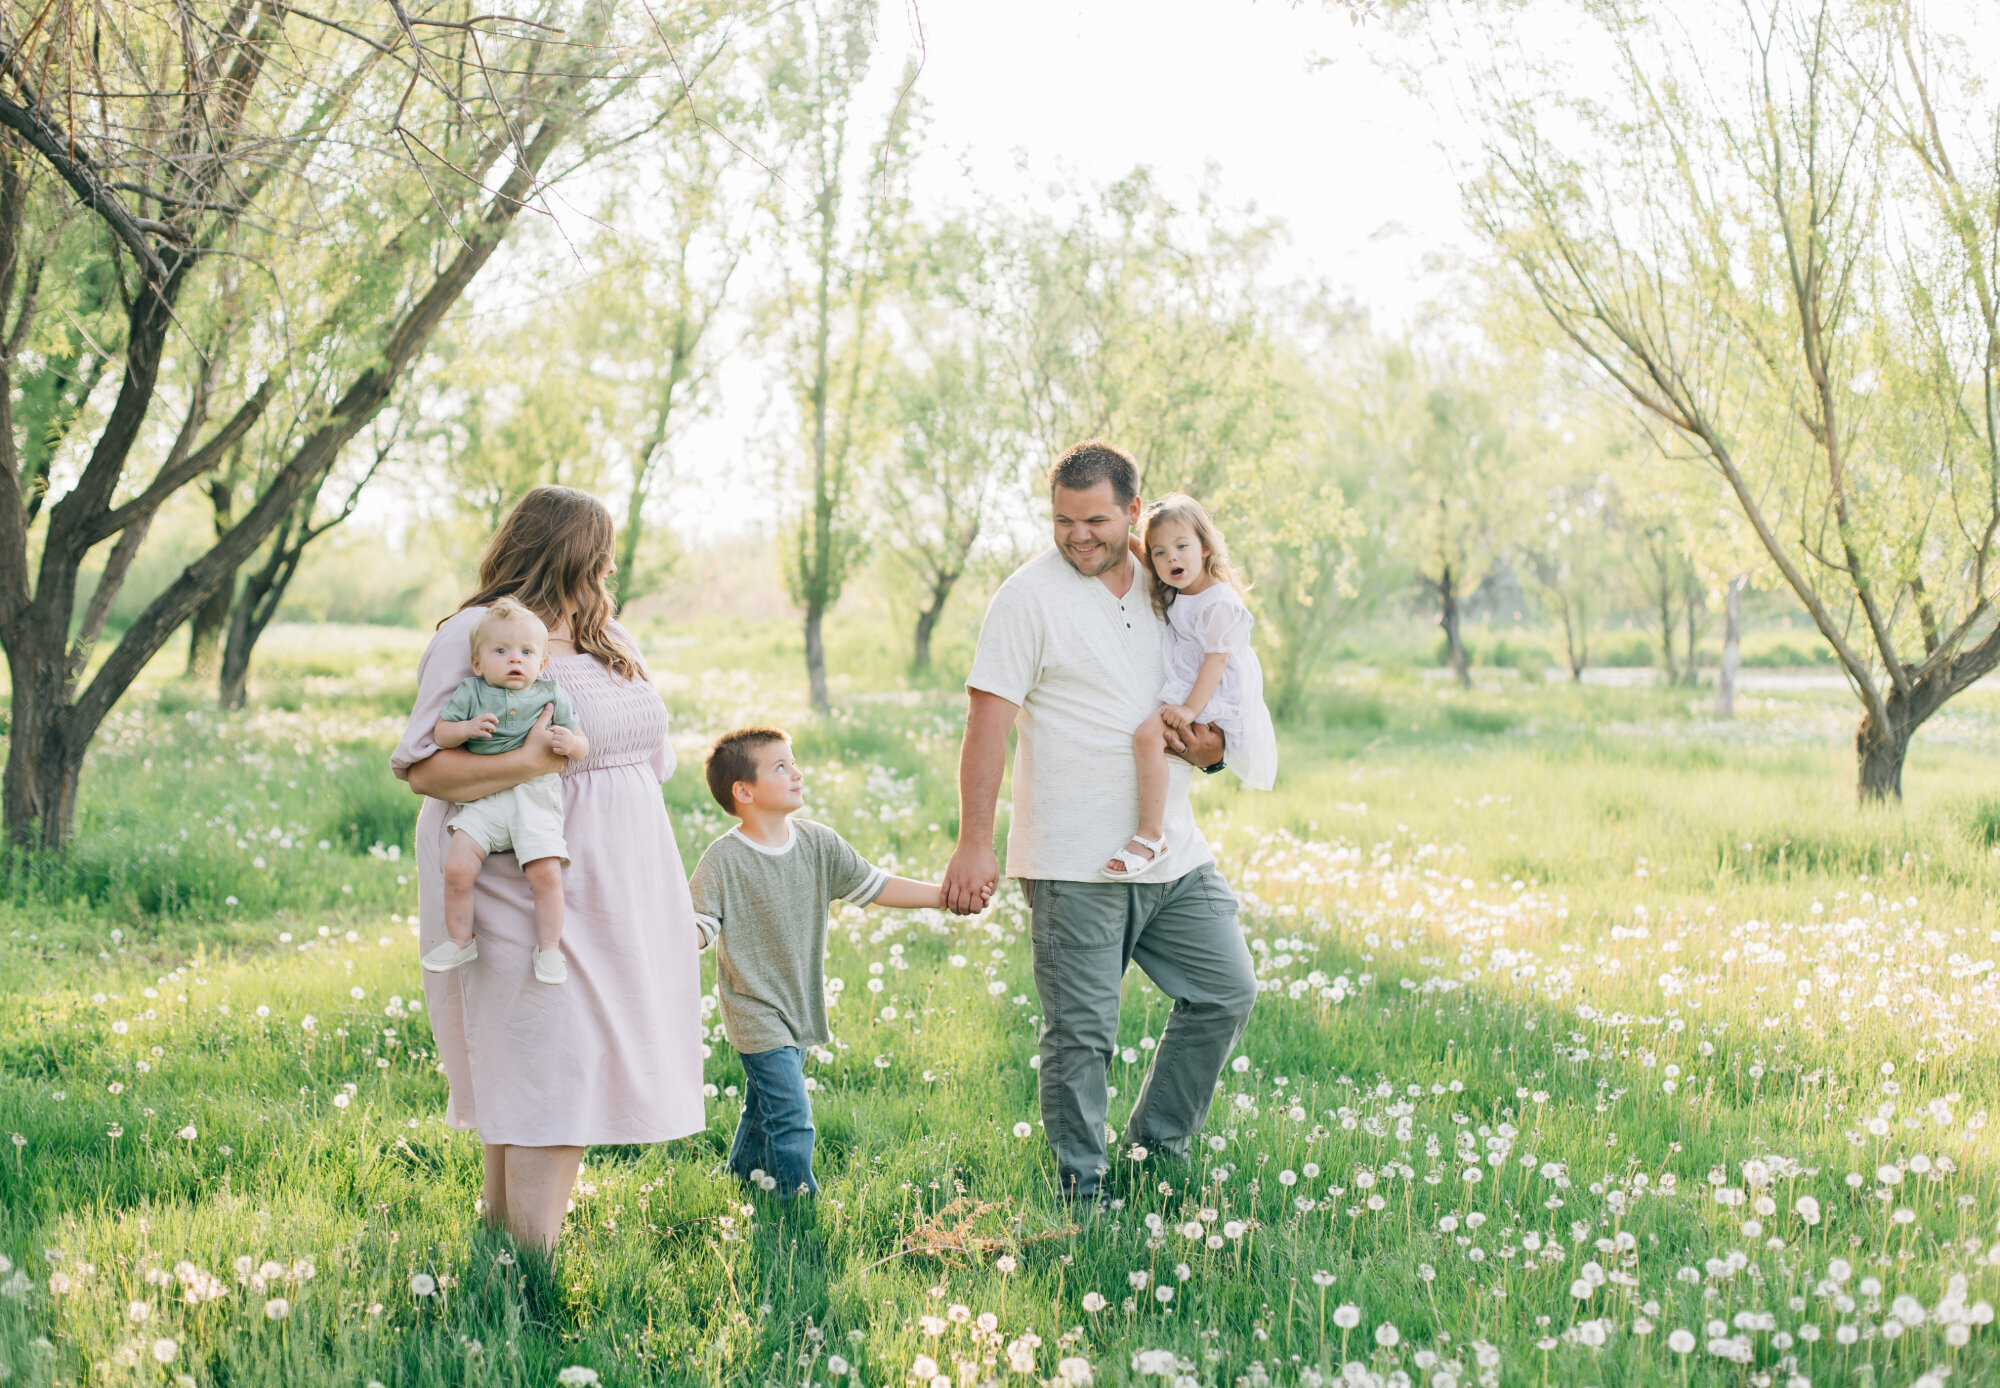 Bountiful_Pond_Family_Photos_Grace_Summers_Photography_5489